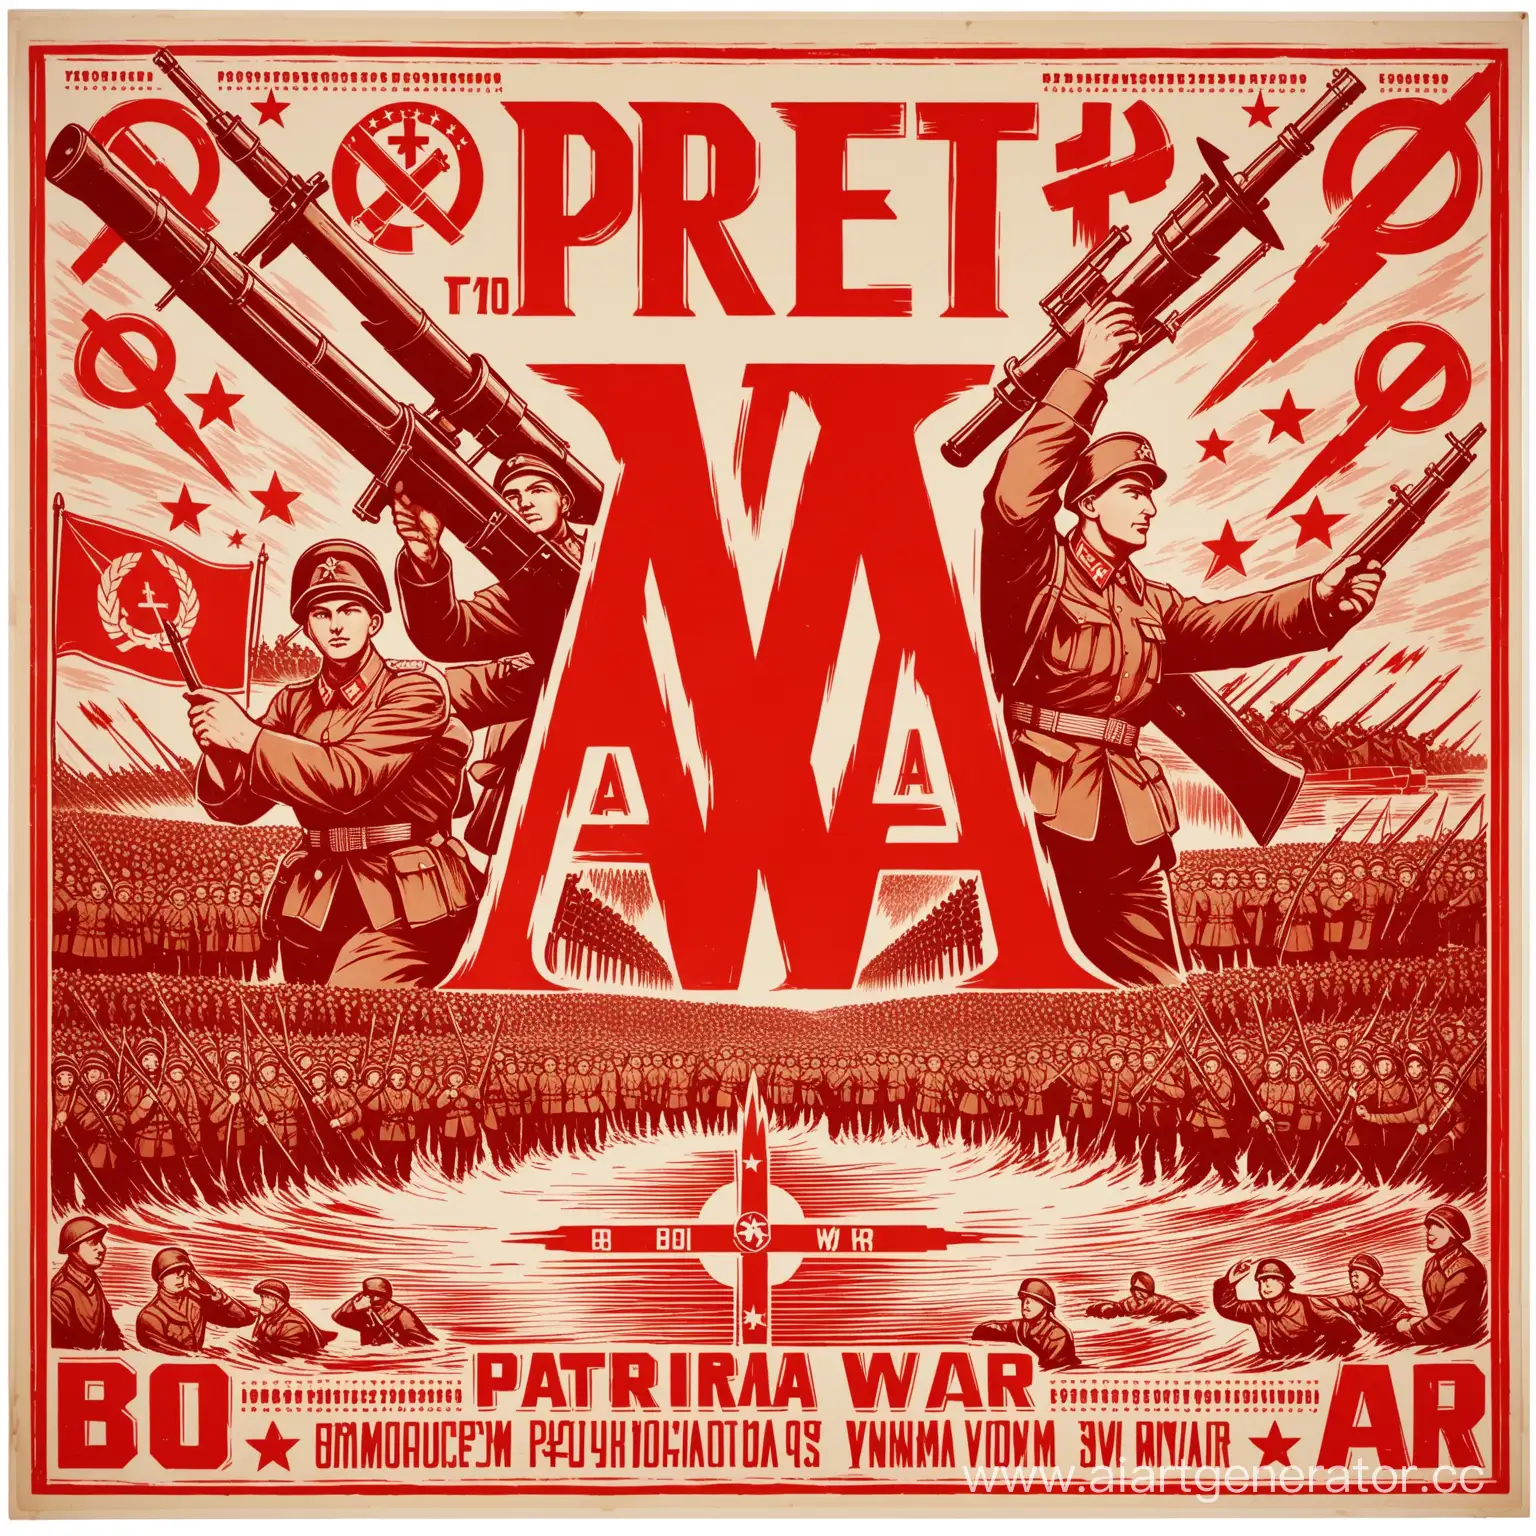 Great-Patriotic-War-Poster-with-Letters-and-Symbols